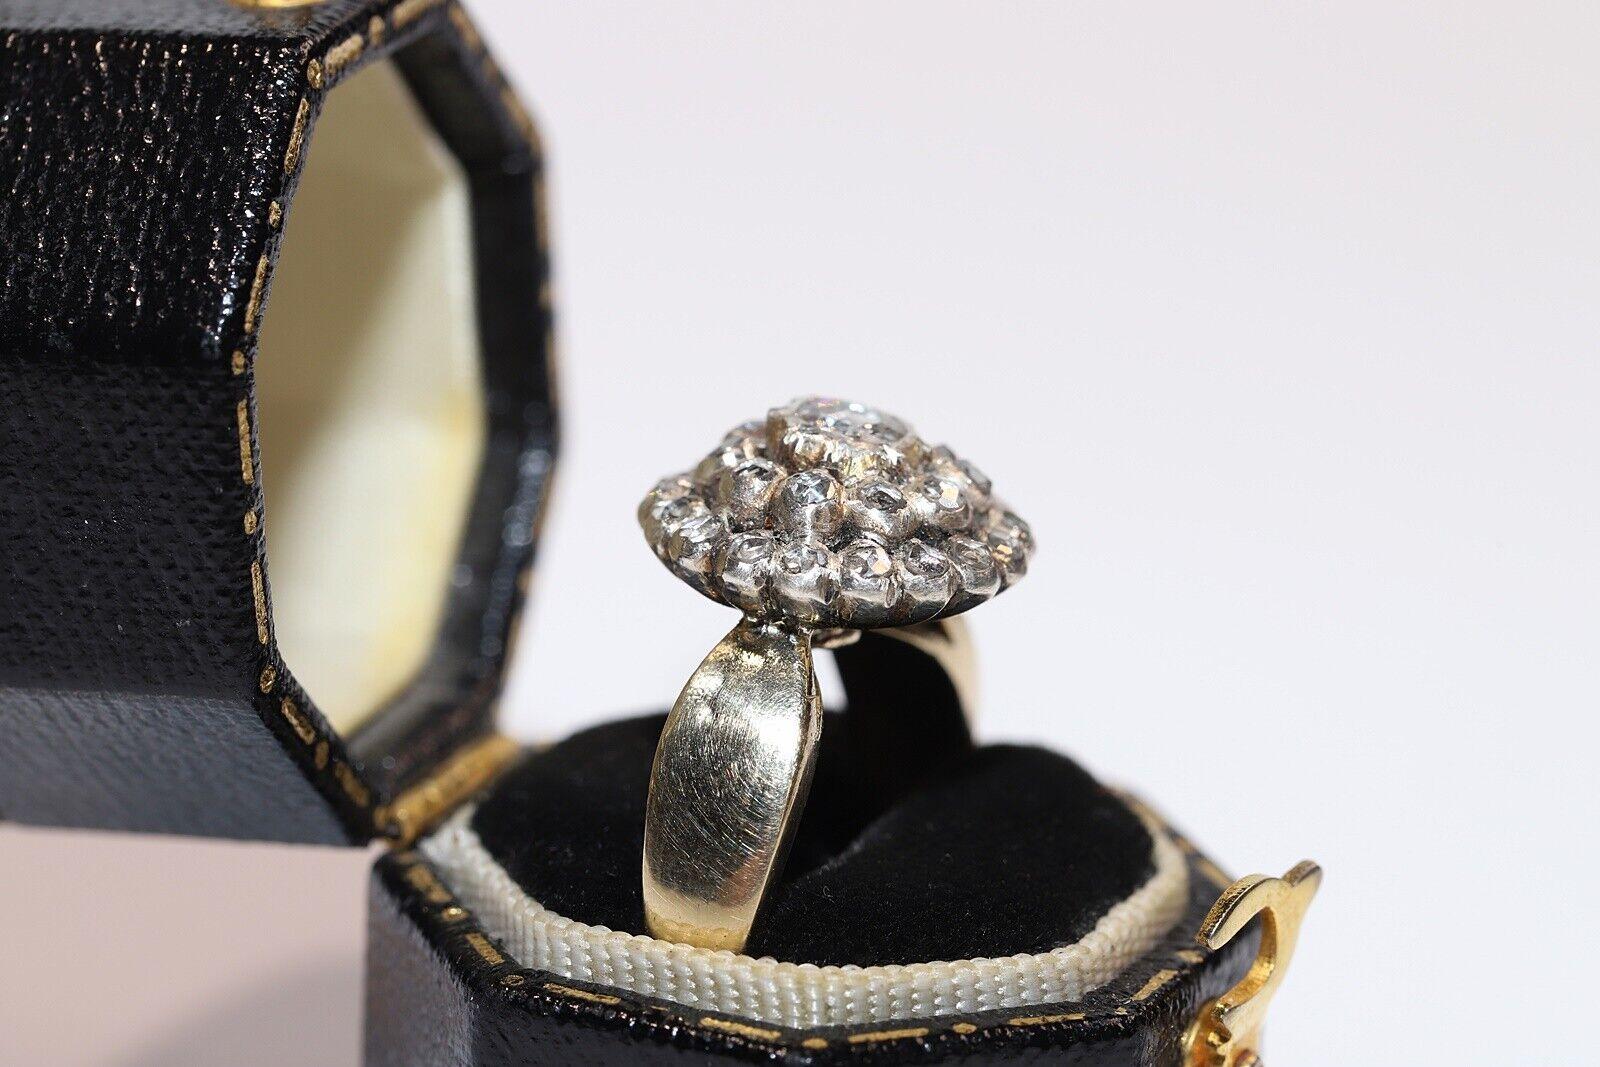 In very good condition.
Total weight is 4.7 grams.
Totally is diamond 0.85 carat.
The diamond is has H-I color and vs-s1-s2-s3 clarity.
Ring size is US 7 (We offer free resizing)
We can make any size.
Box is not included.
Please contact for any